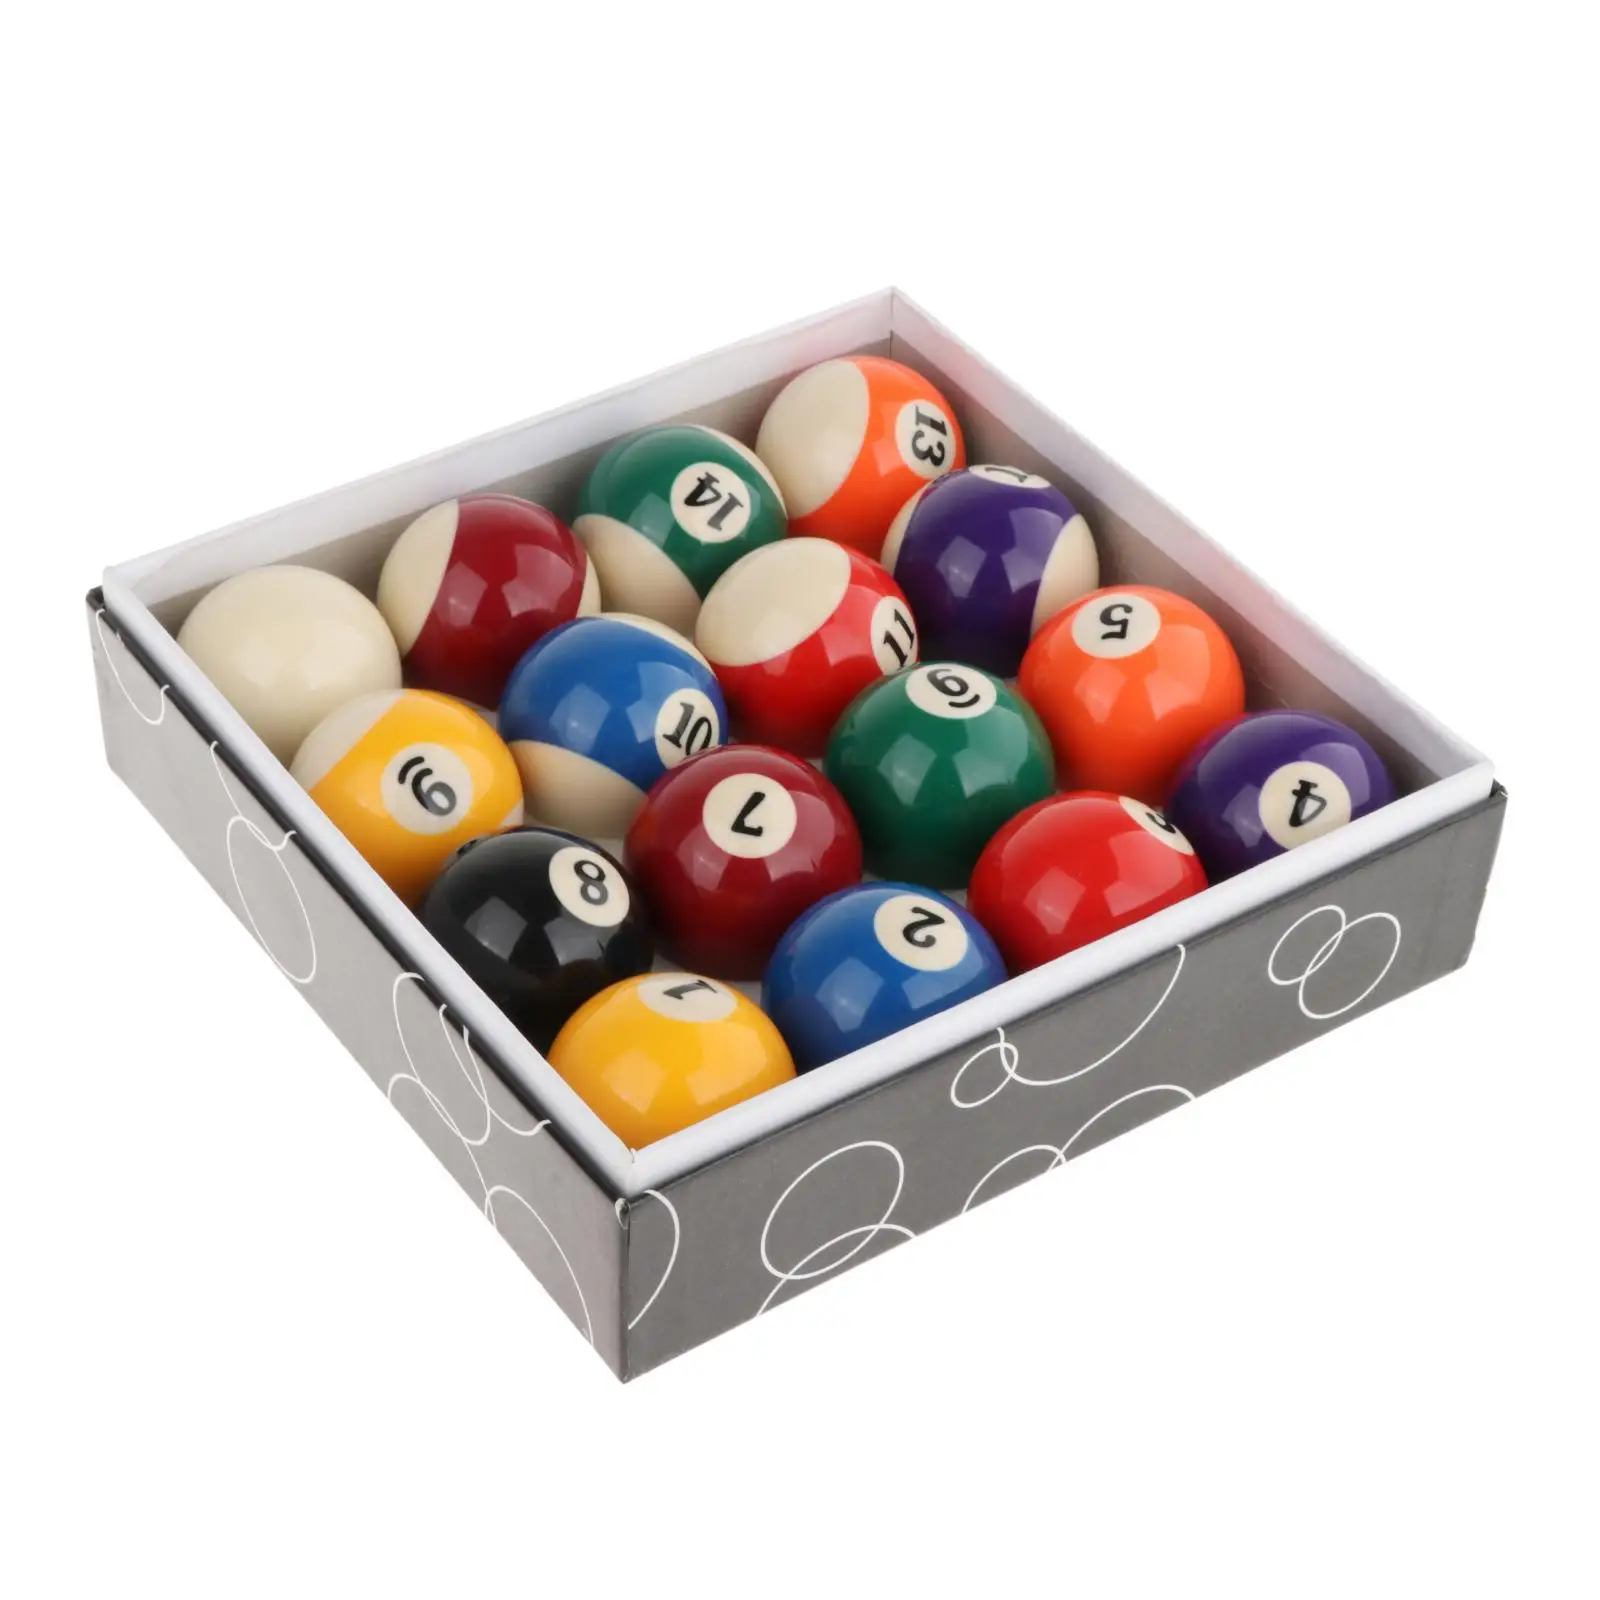 16 Pieces Resin Billiard Balls Pool Cue Balls Full Set for Leisure Time Bars